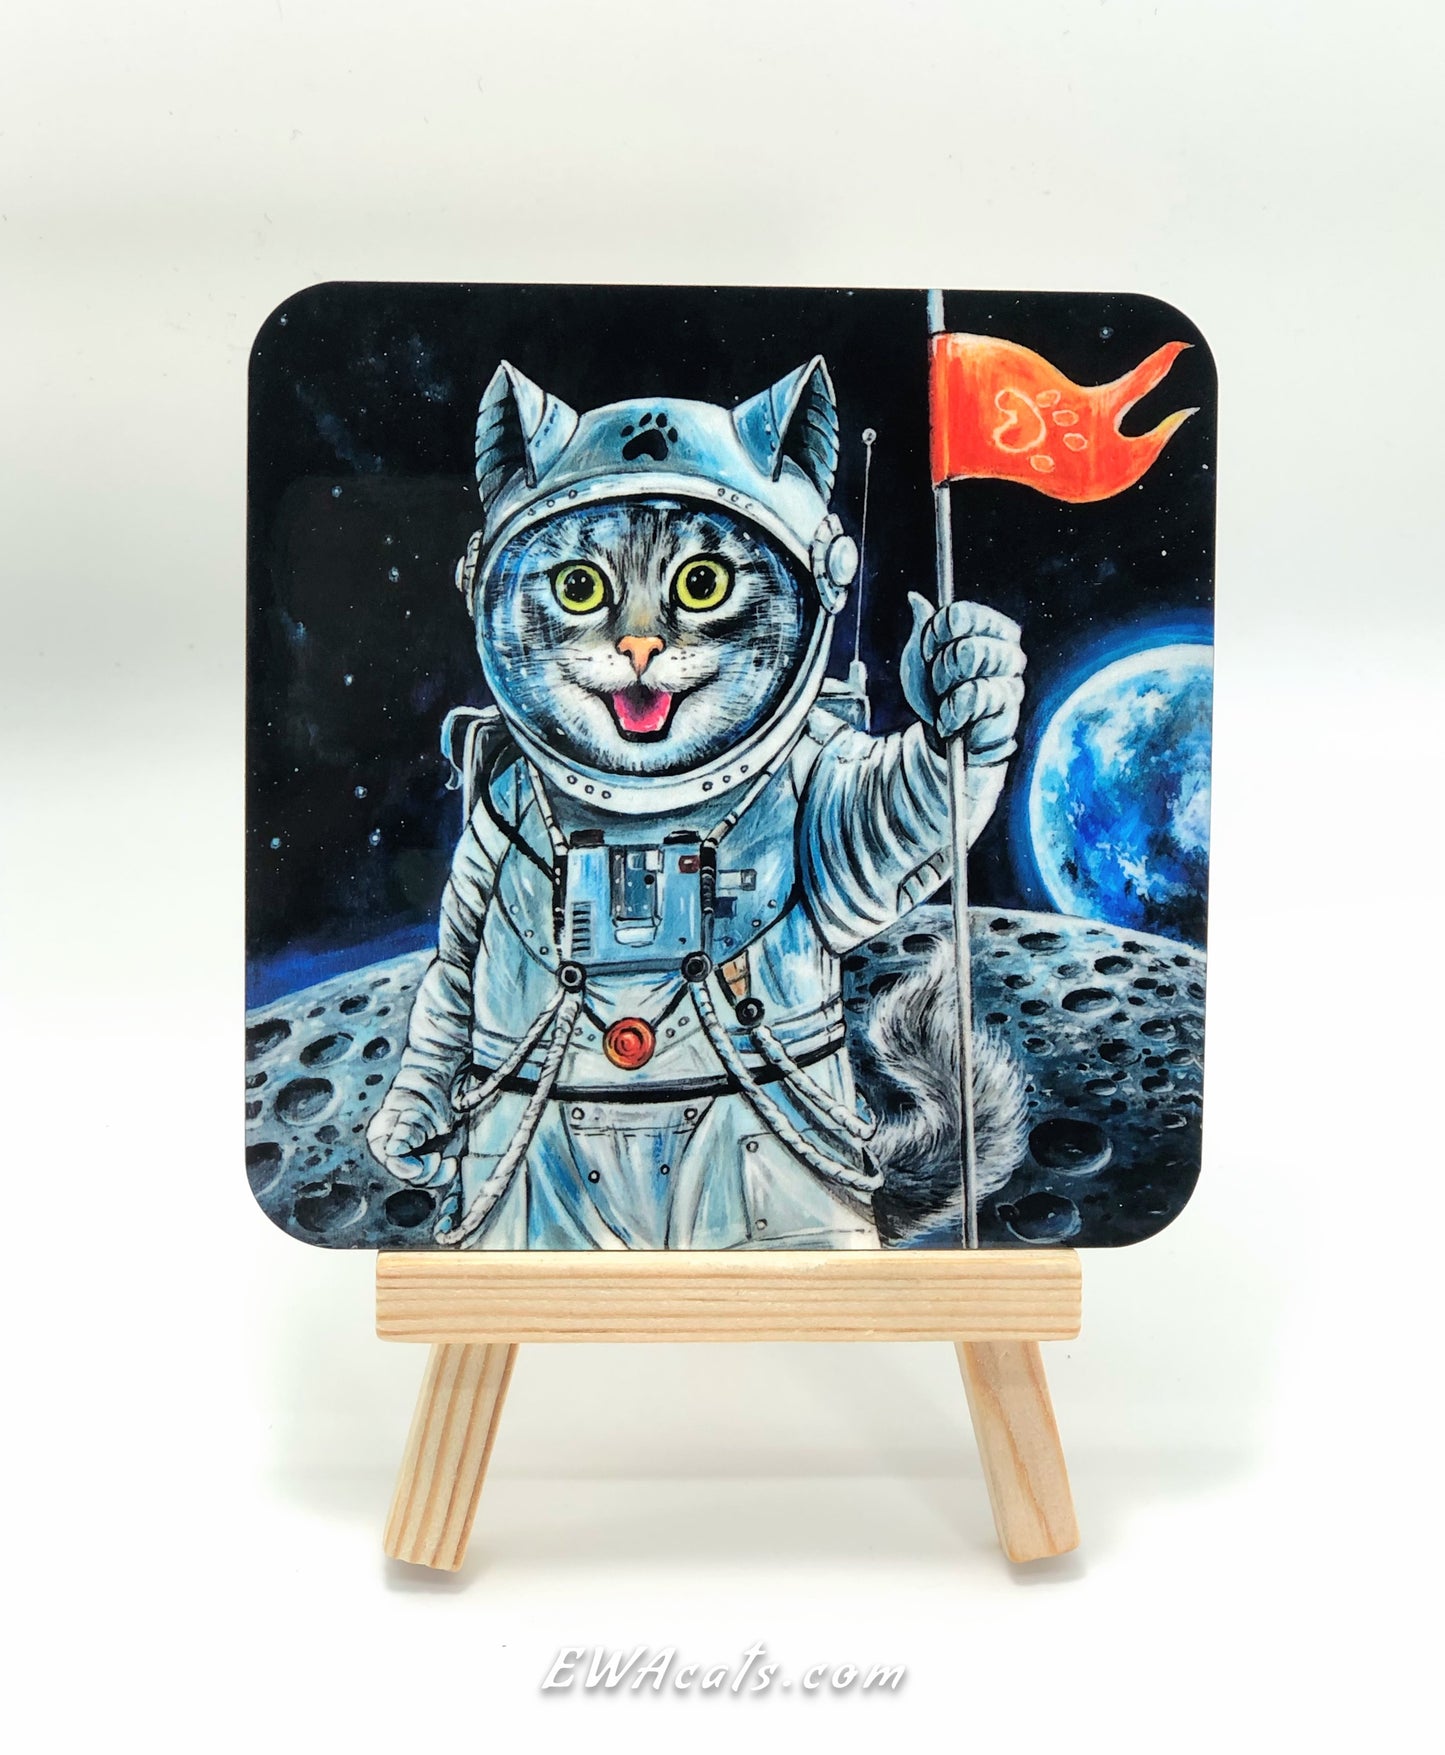 Coaster "First Cat on the Moon"